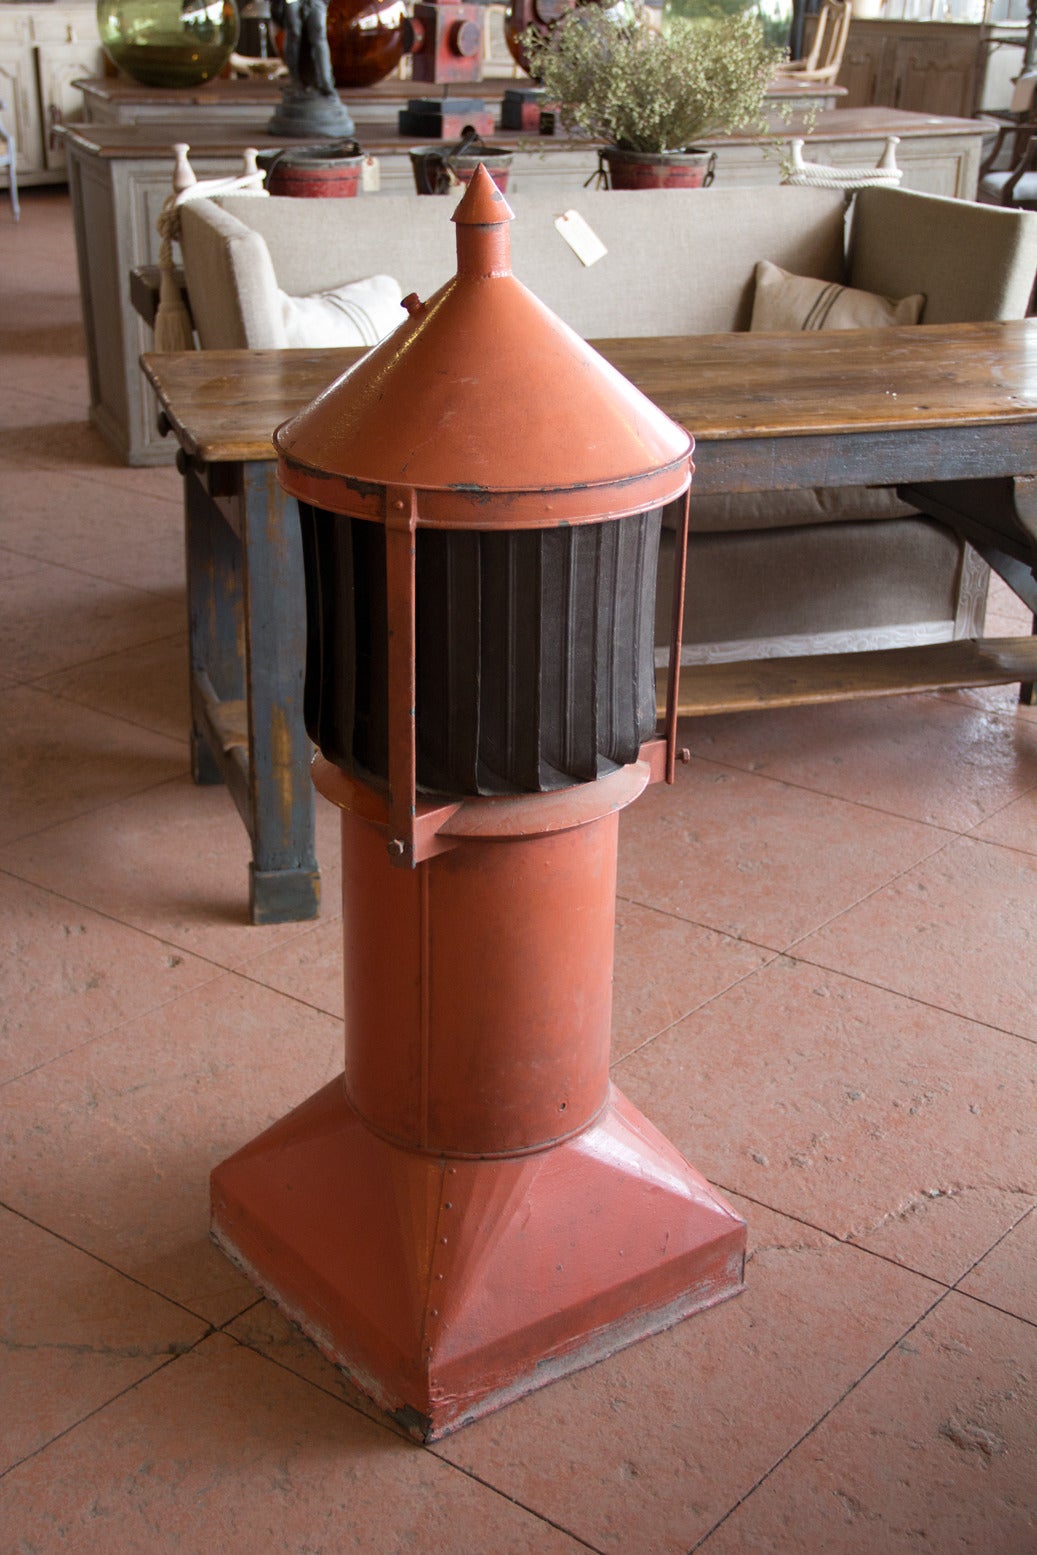 This is a wonderful vintage riveted zinc chimney cowl. It spins gently in the wind and would make a lovely garden accent. It is one of a rare collection that we currently have. If you would like to provide us with your email address, we would be